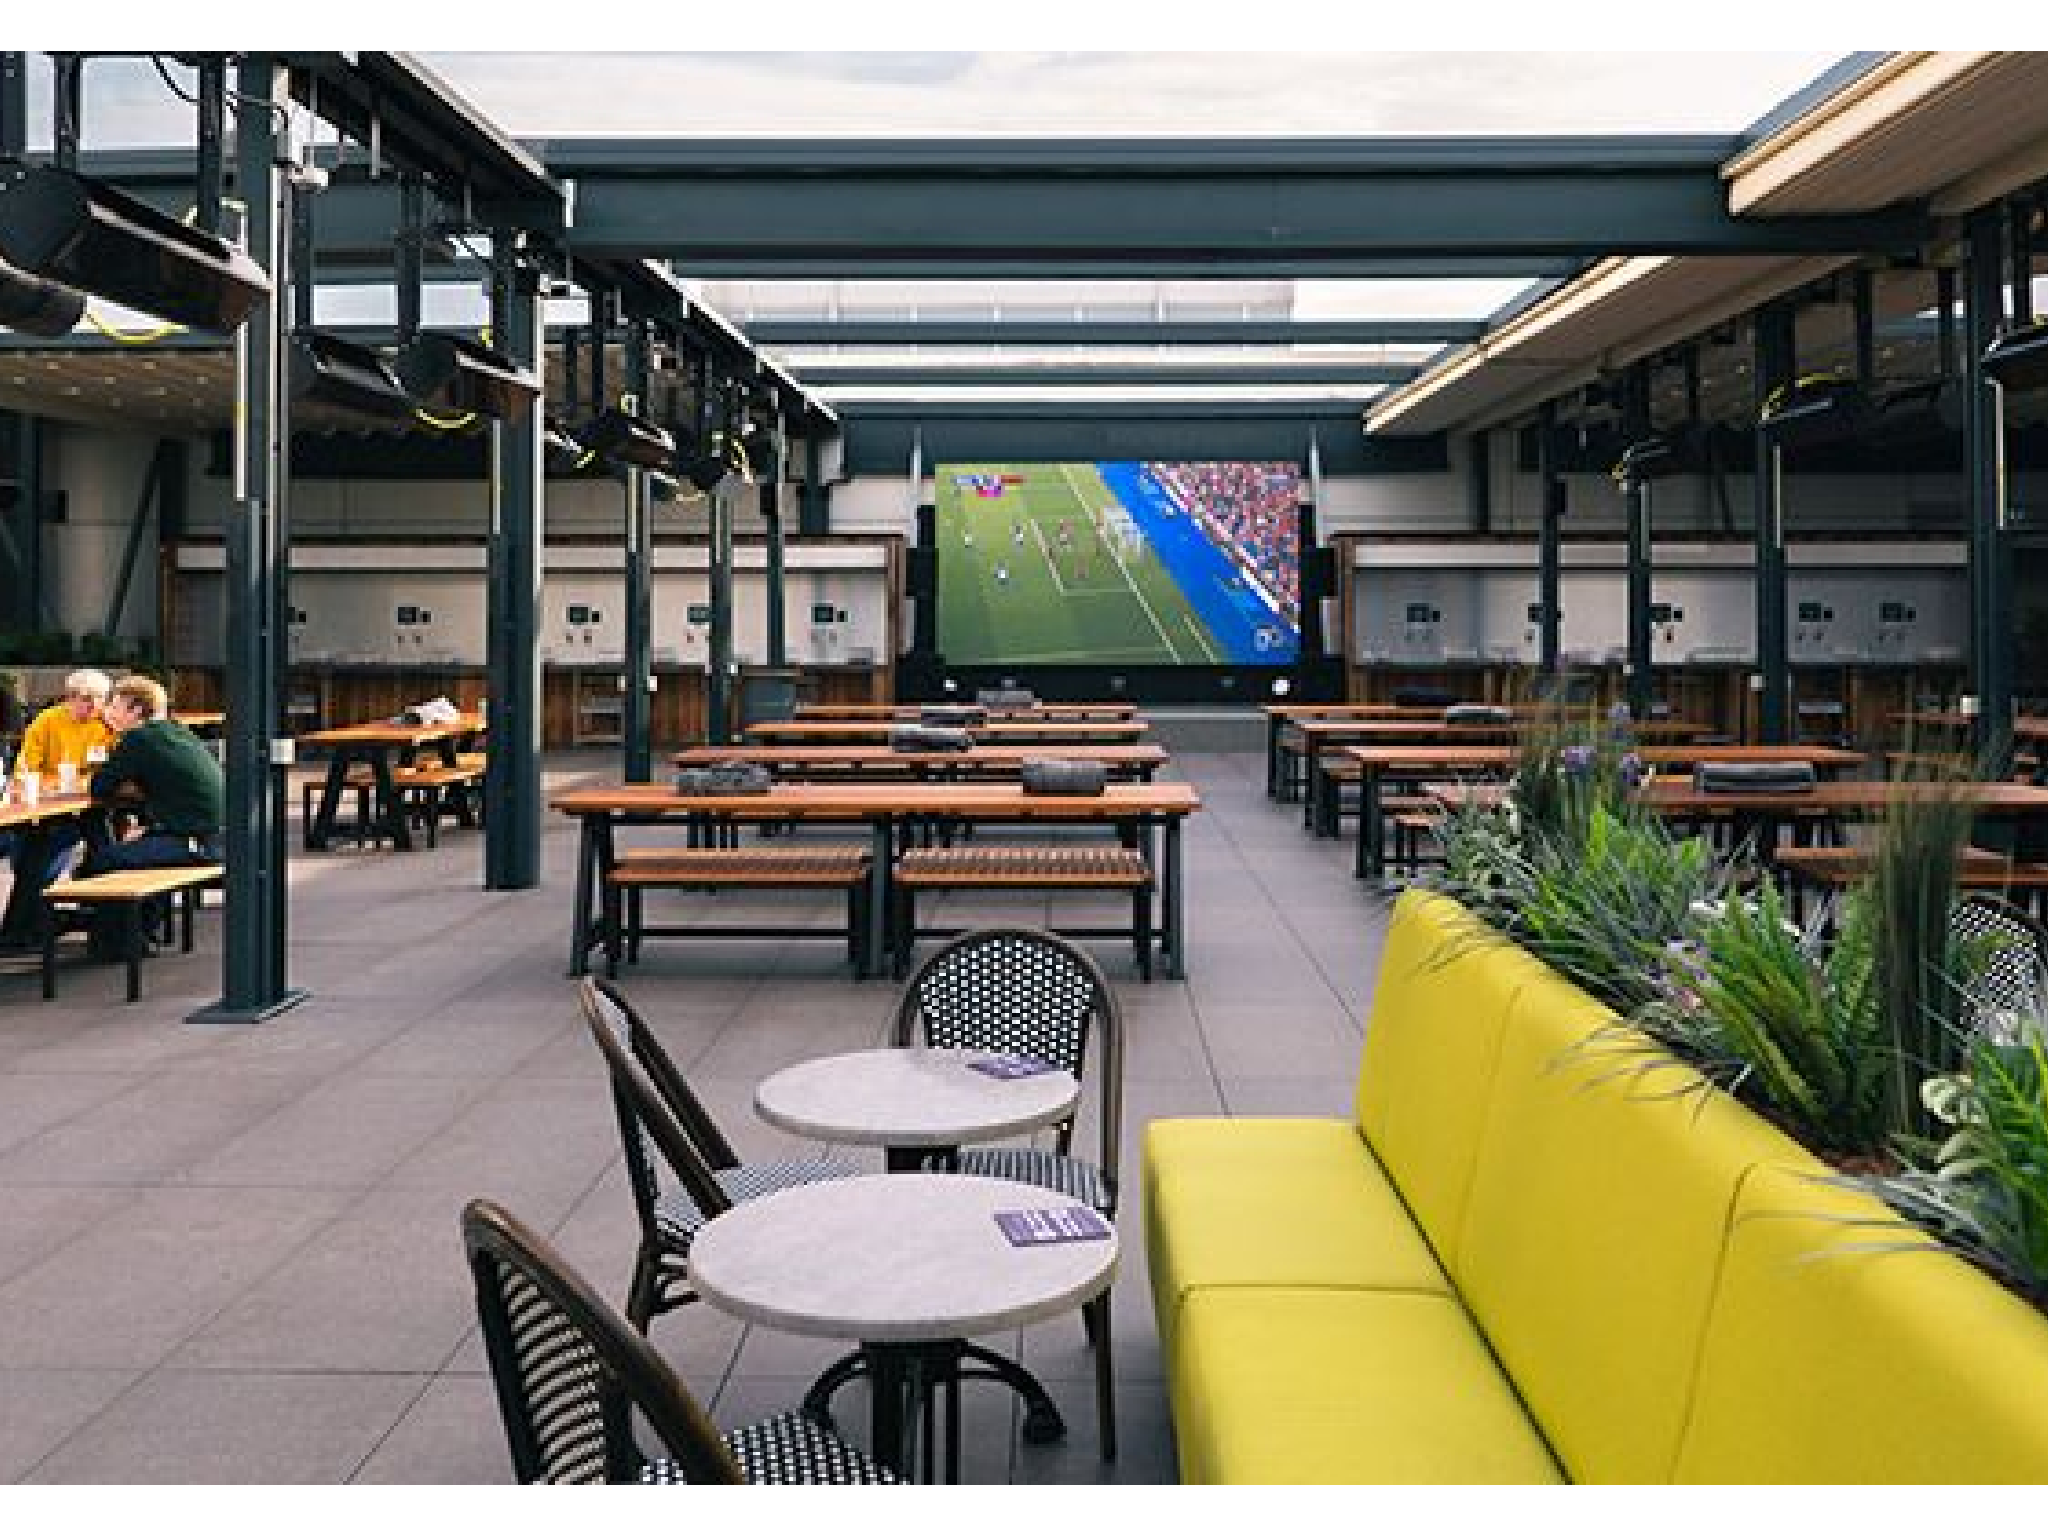 Gravity MAX’s terrace has a retractable roof so you can watch the games in all weathers